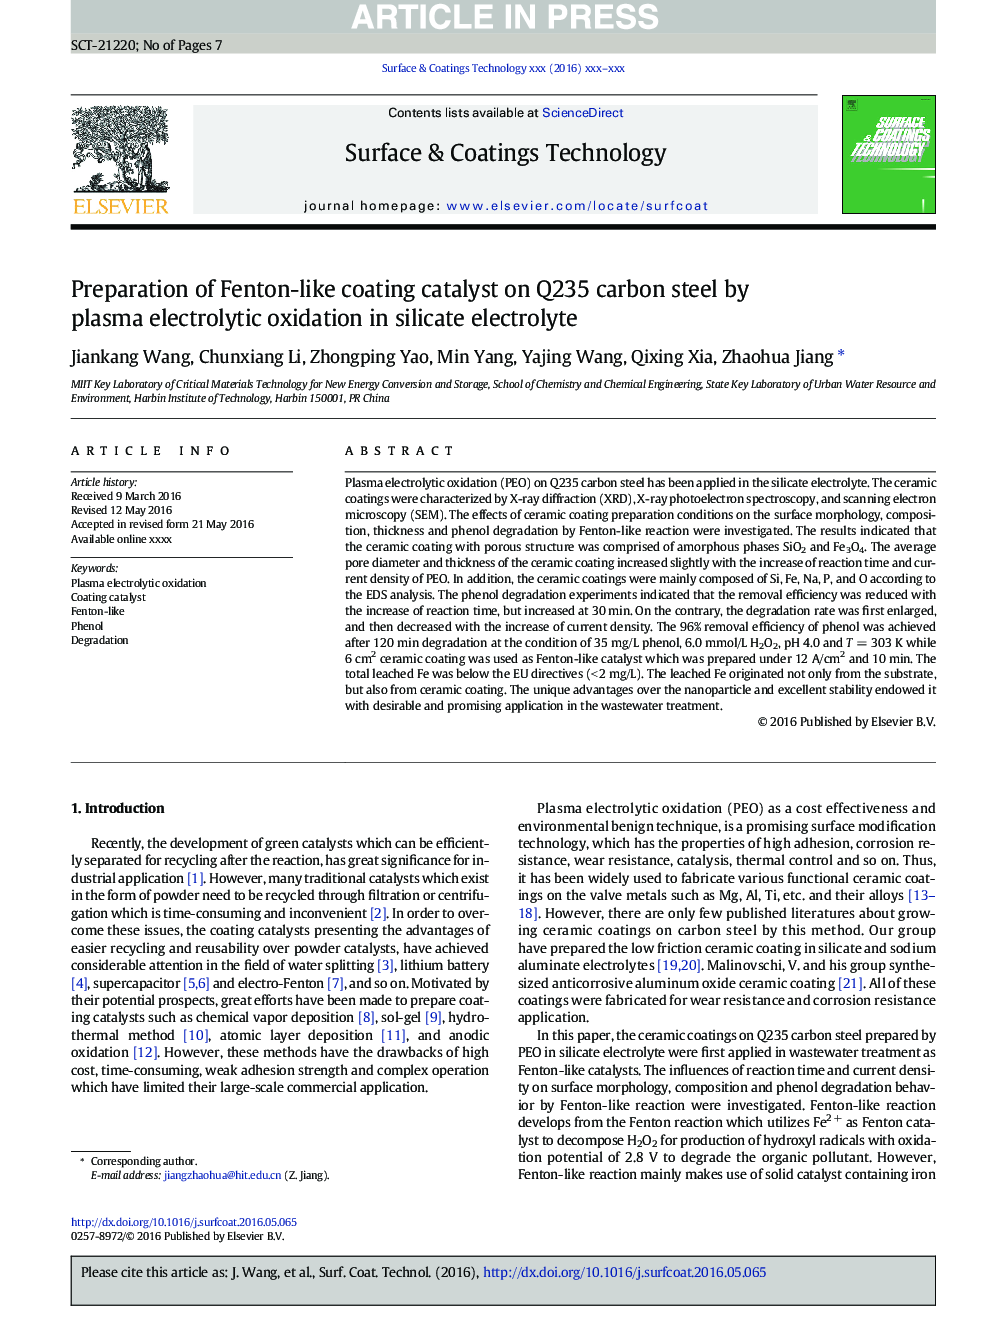 Preparation of Fenton-like coating catalyst on Q235 carbon steel by plasma electrolytic oxidation in silicate electrolyte